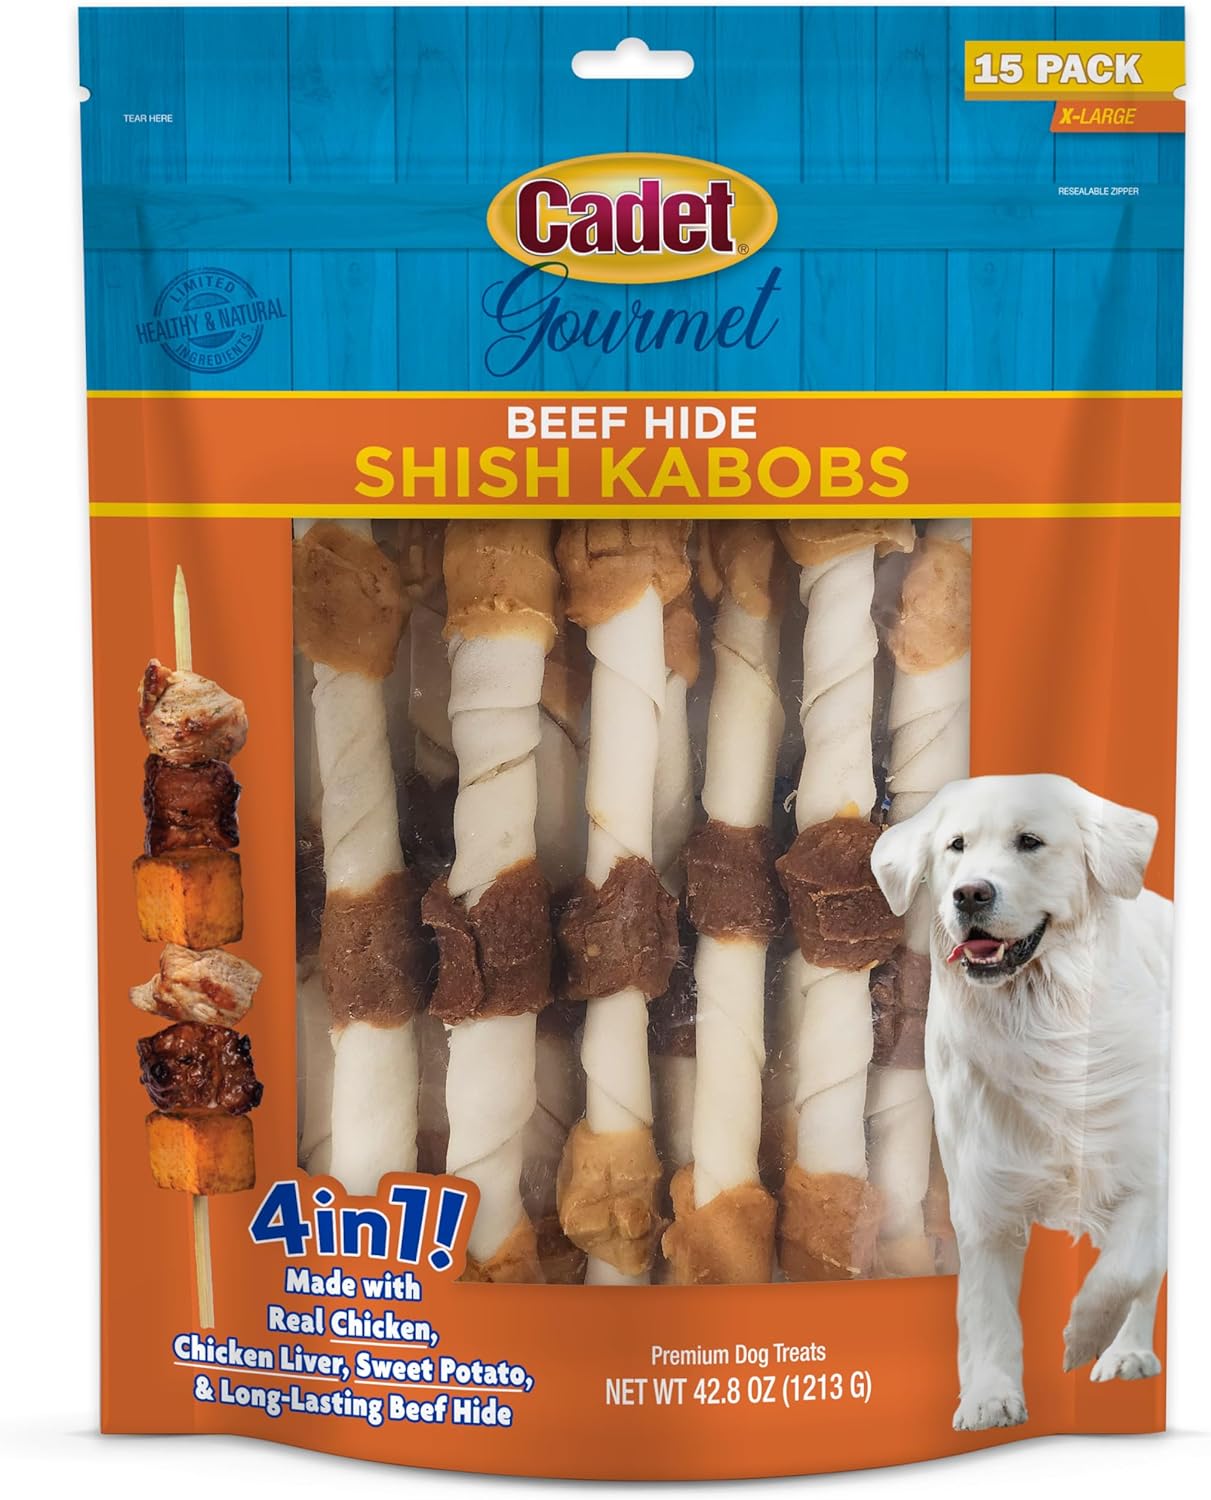 Cadet Gourmet X-Large Triple-Flavored Beef Hide Shish Kabob Dog Treats - Healthy & Natural Chicken, Liver, and Sweet Potato Dog Treats for Dogs Over 30 Lbs., 10 in. (15 Count)